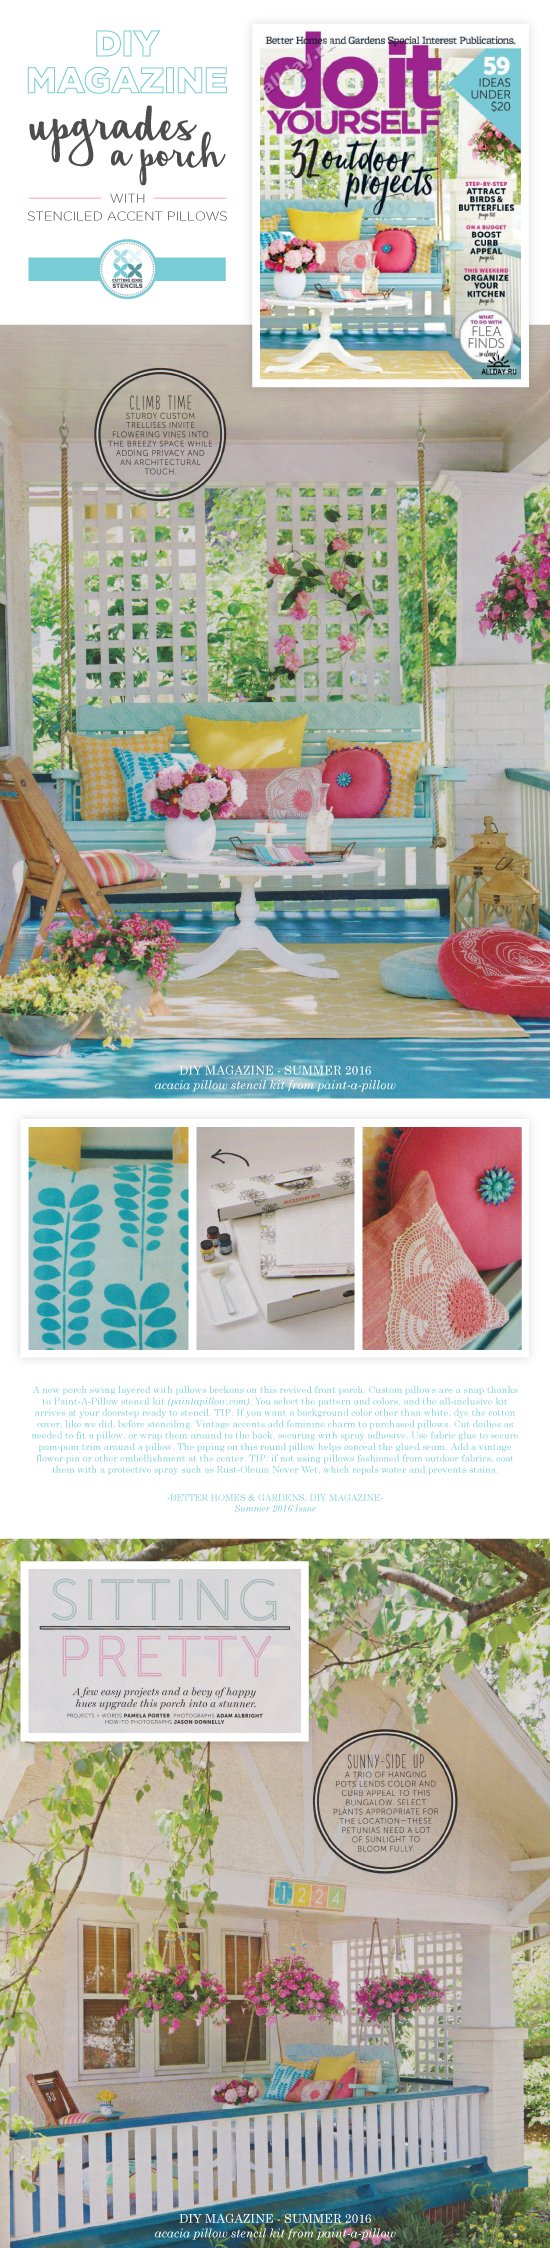 Cutting Edge Stencils is featured on the cover of the Summer 2016 issue of Do It Yourself Magazine from BHG. http://www.cuttingedgestencils.com/acacia-stencil-paint-a-pillow-kit.html